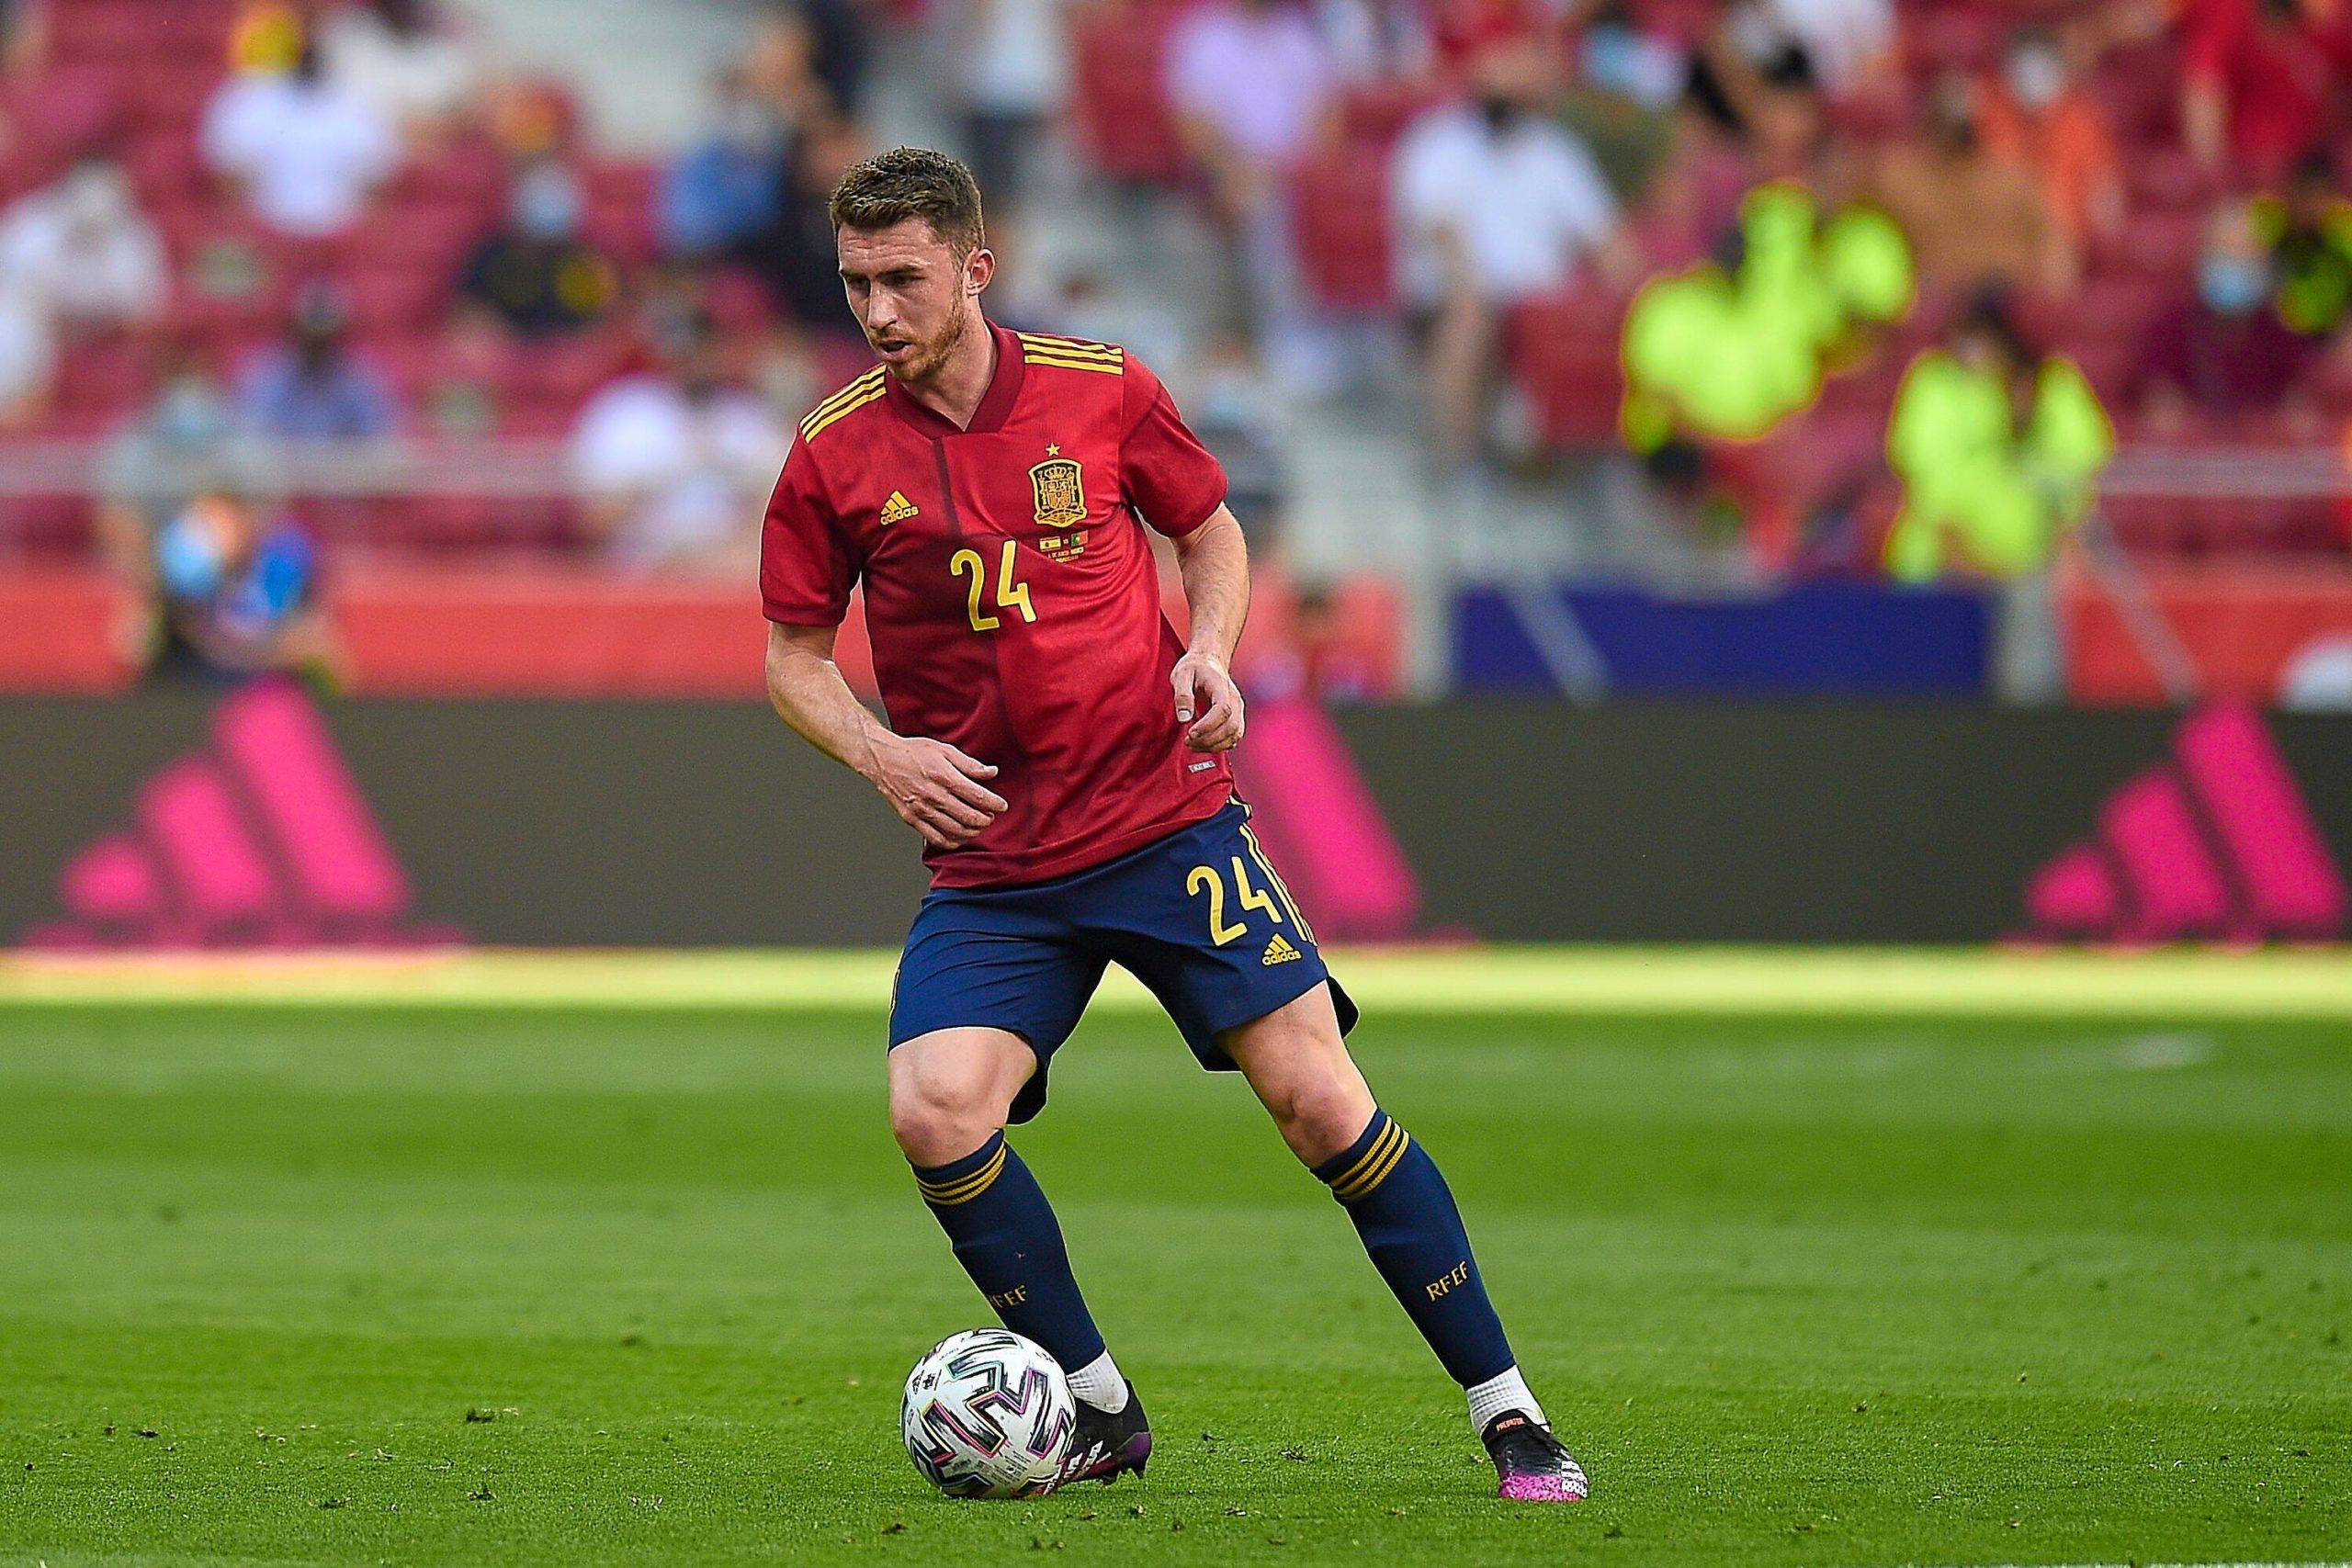 Barcelona eyeing a loan move for Man City's Laporte who is seen in the picture